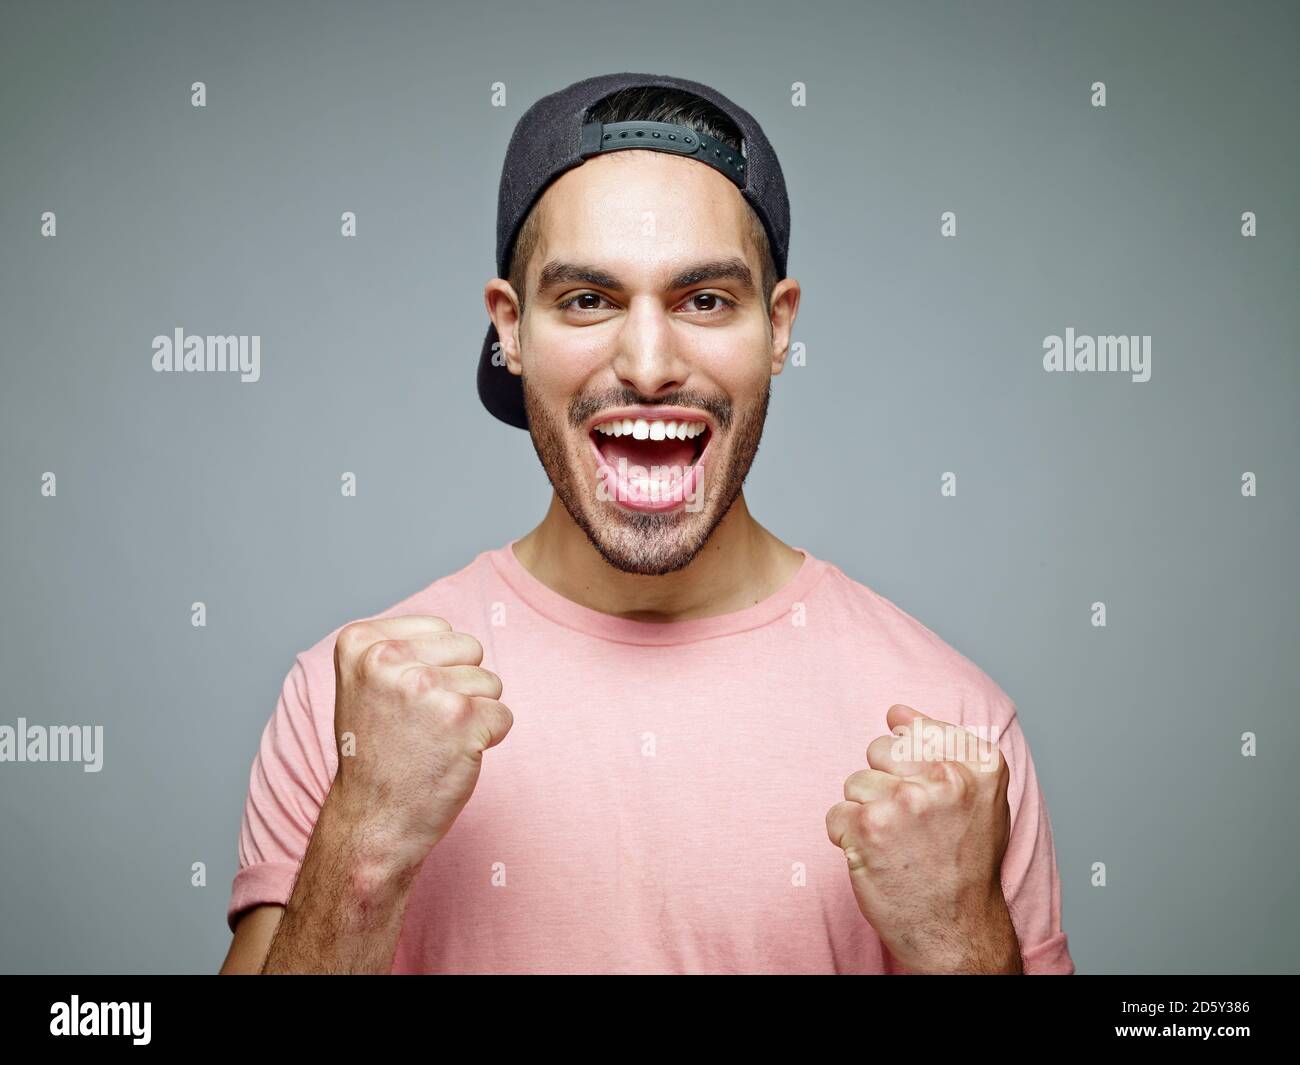 Portrait of man with baseball cap screaming for joy in front of grey background Stock Photo